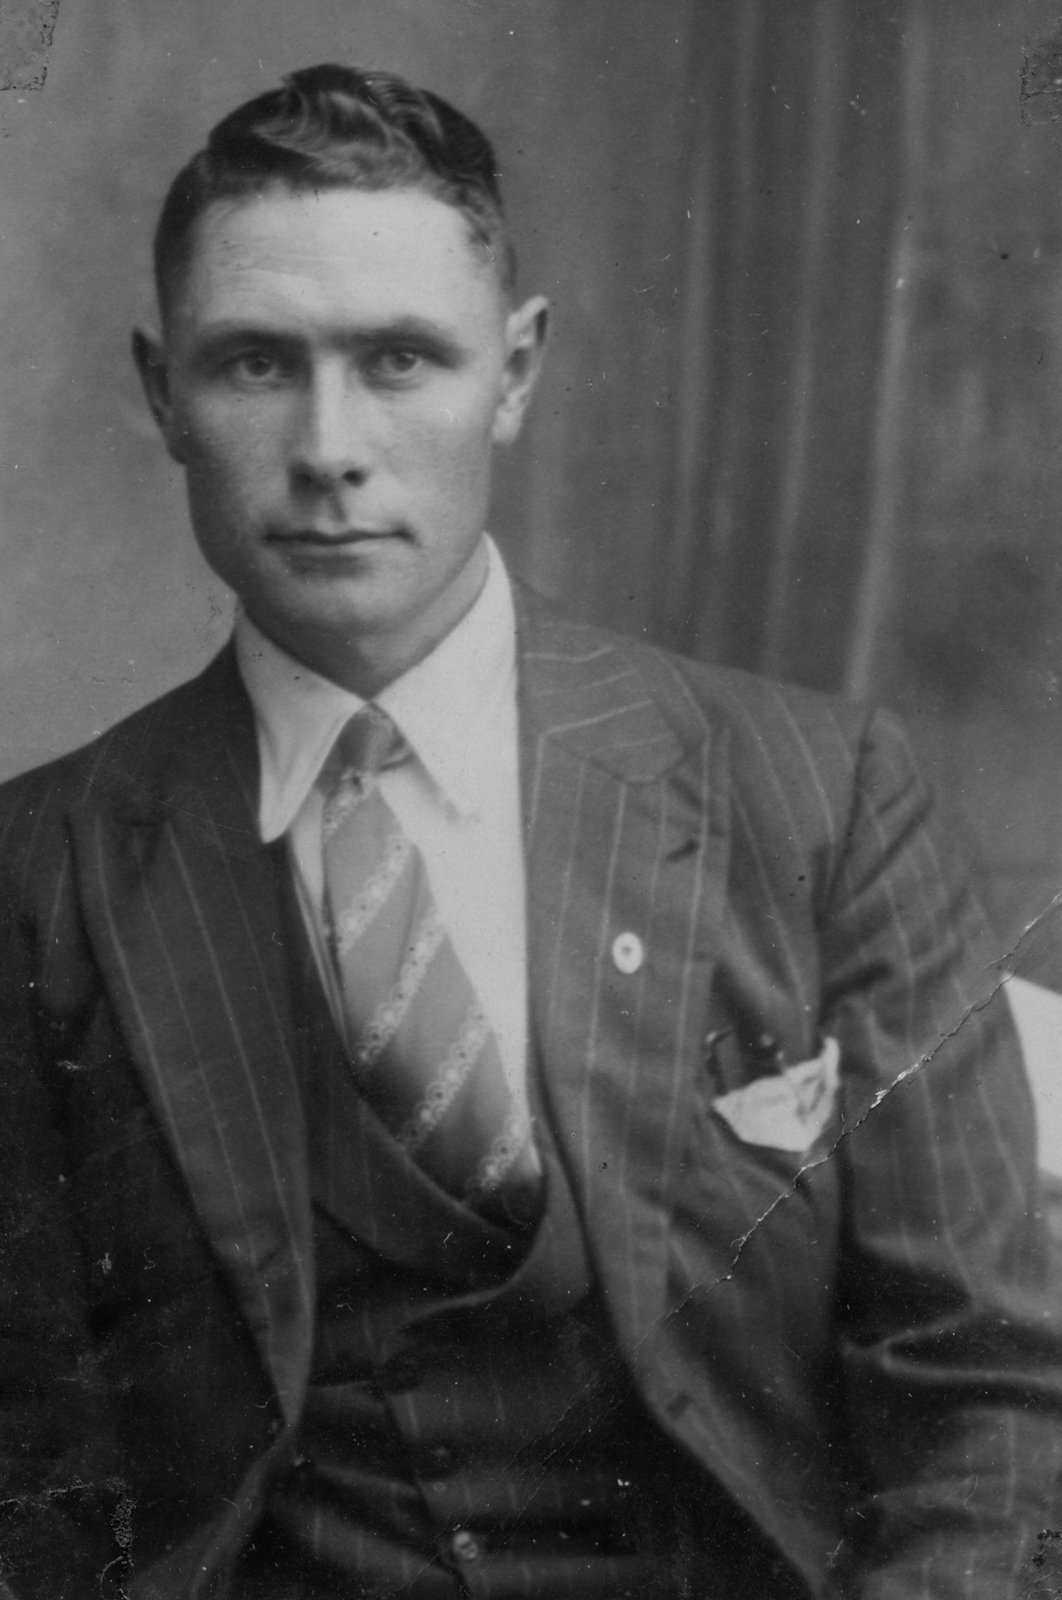 This is the only known surviving photograph of John McGing as an adult. This image illustrates him in a London studio having a formal portrait taken.